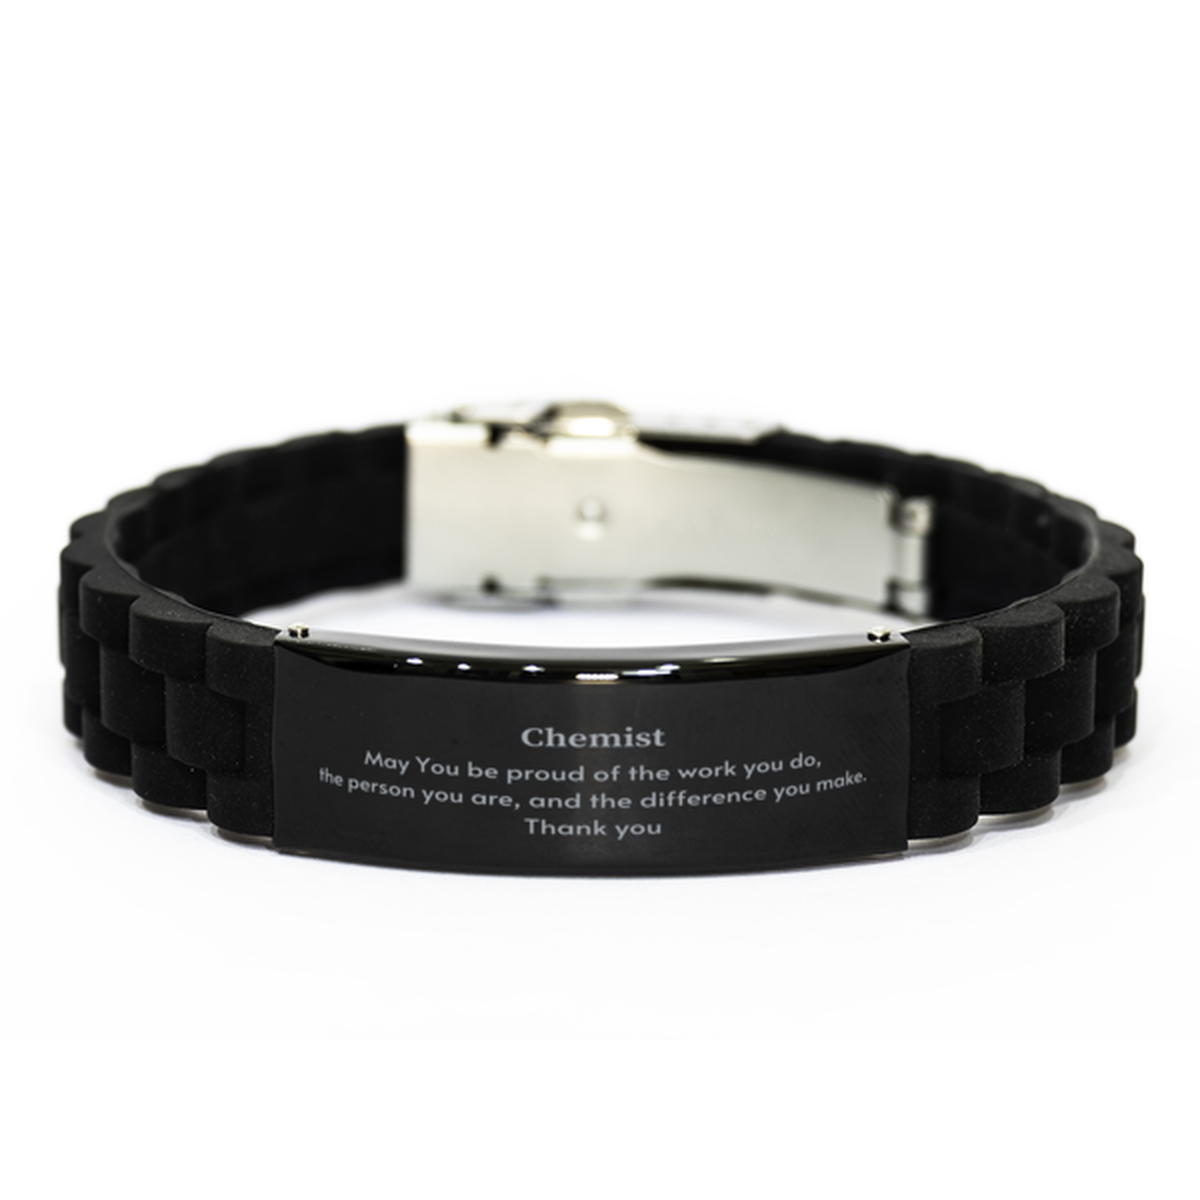 Heartwarming Black Glidelock Clasp Bracelet Retirement Coworkers Gifts for Chemist, Chemist May You be proud of the work you do, the person you are Gifts for Boss Men Women Friends